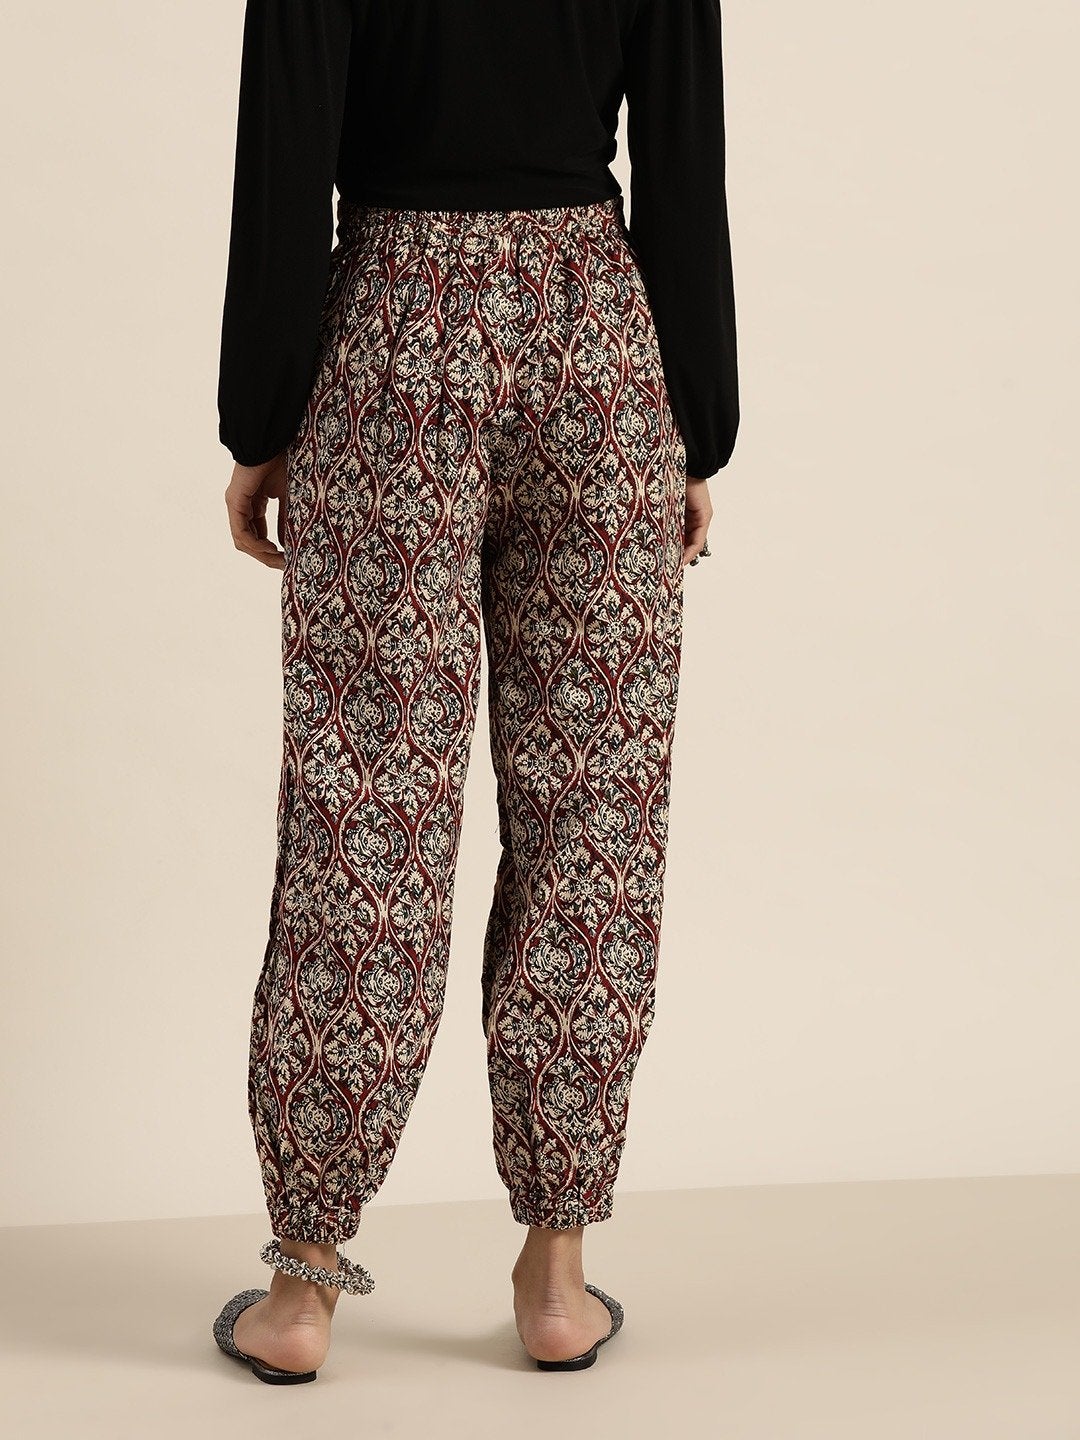 Women's Chocolate Brown Floral Cuffed Pants - SHAE